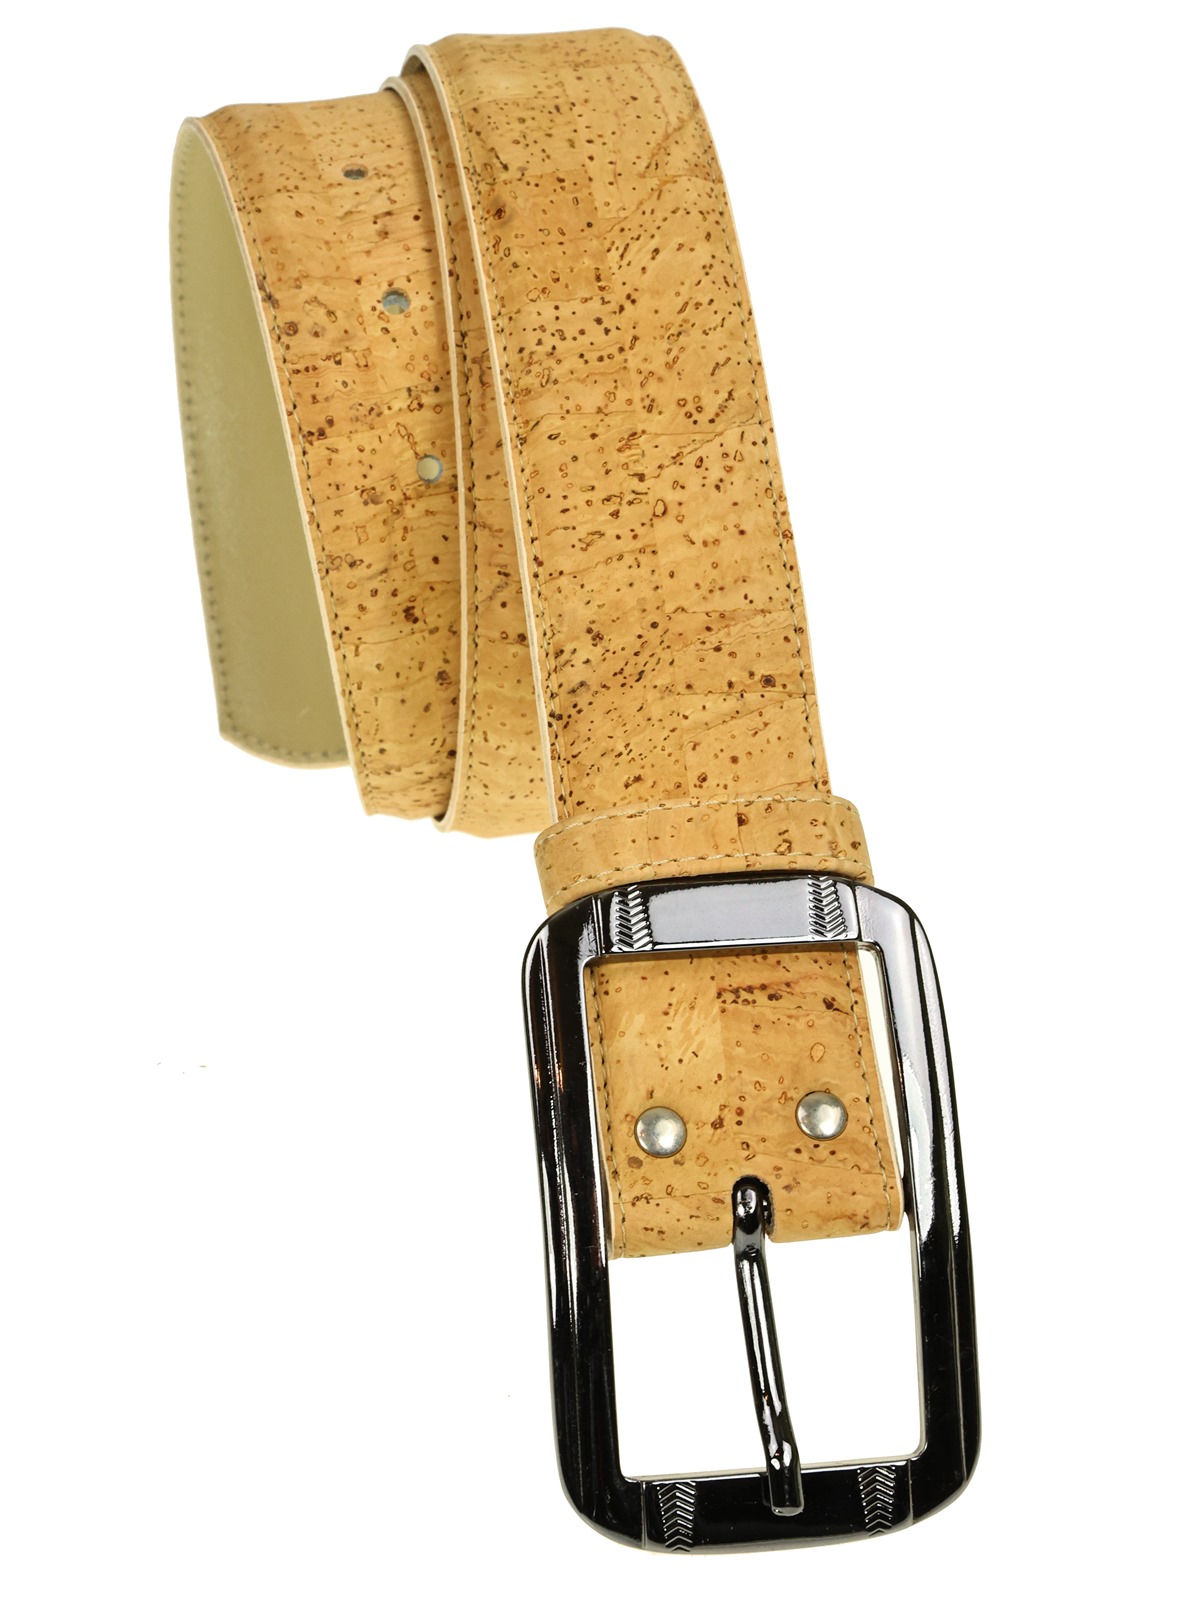 wide trouser belt with a great clasp